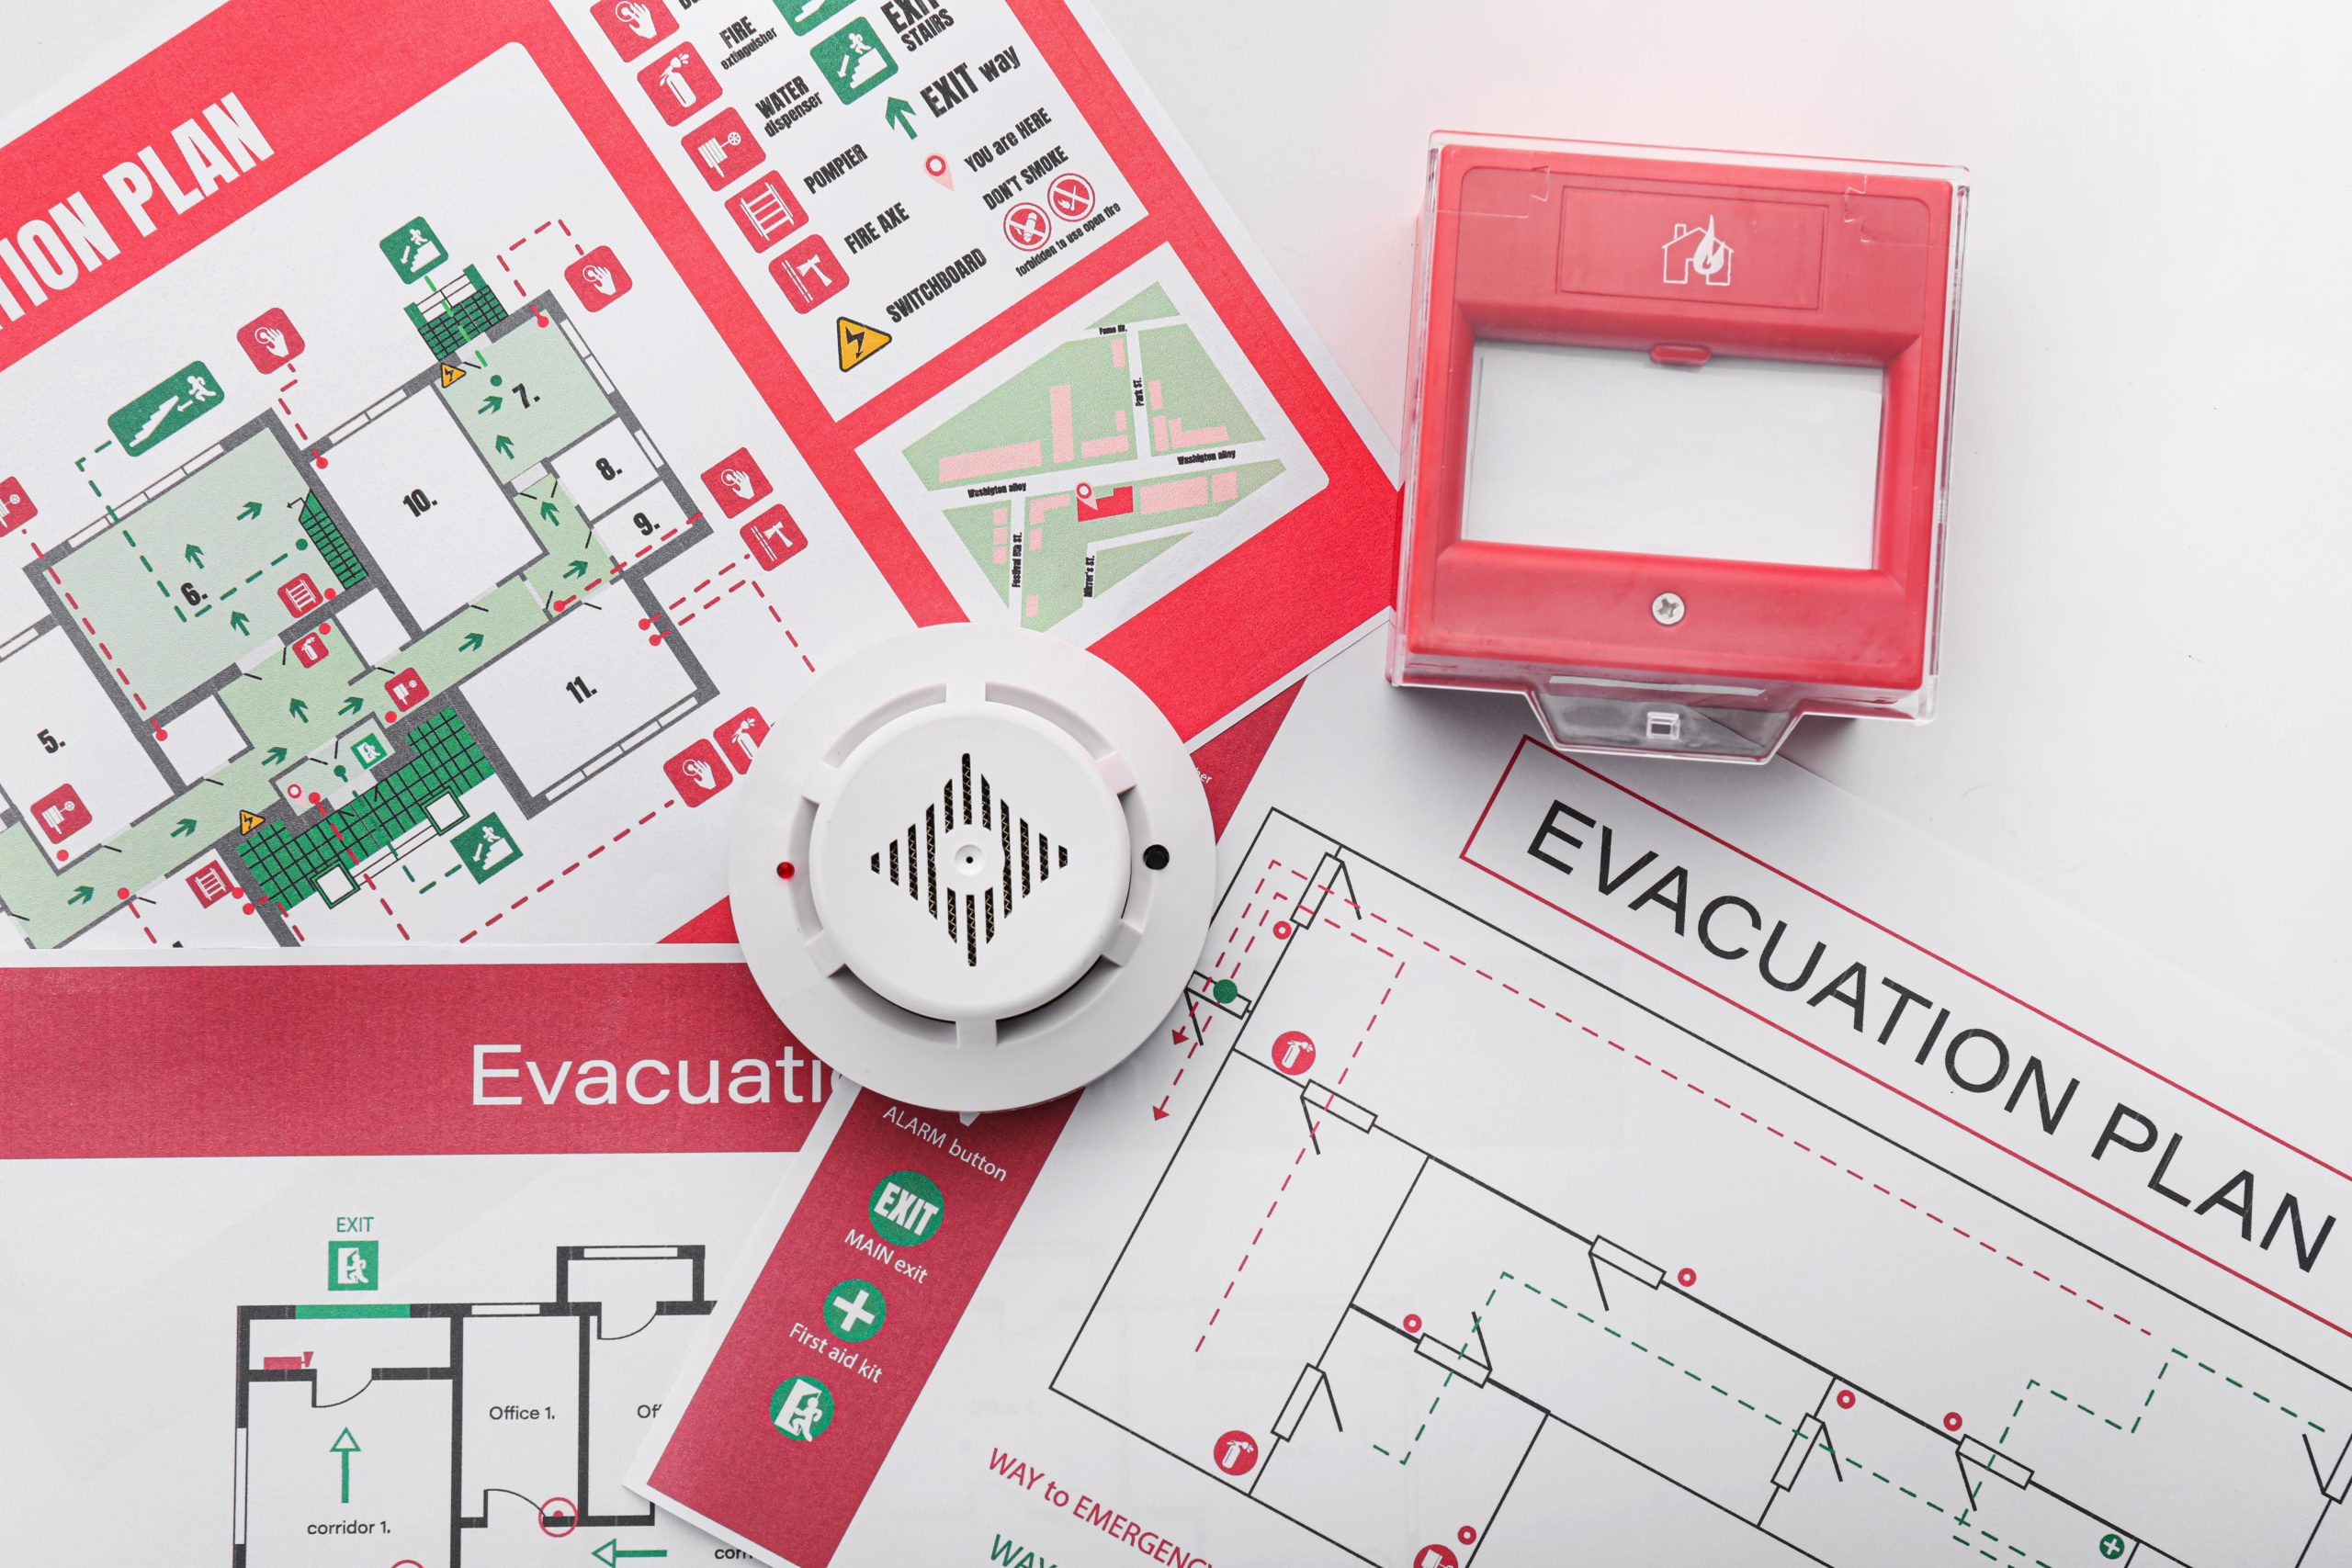 Advanced Fire Protection - What is the importance of fire protection?